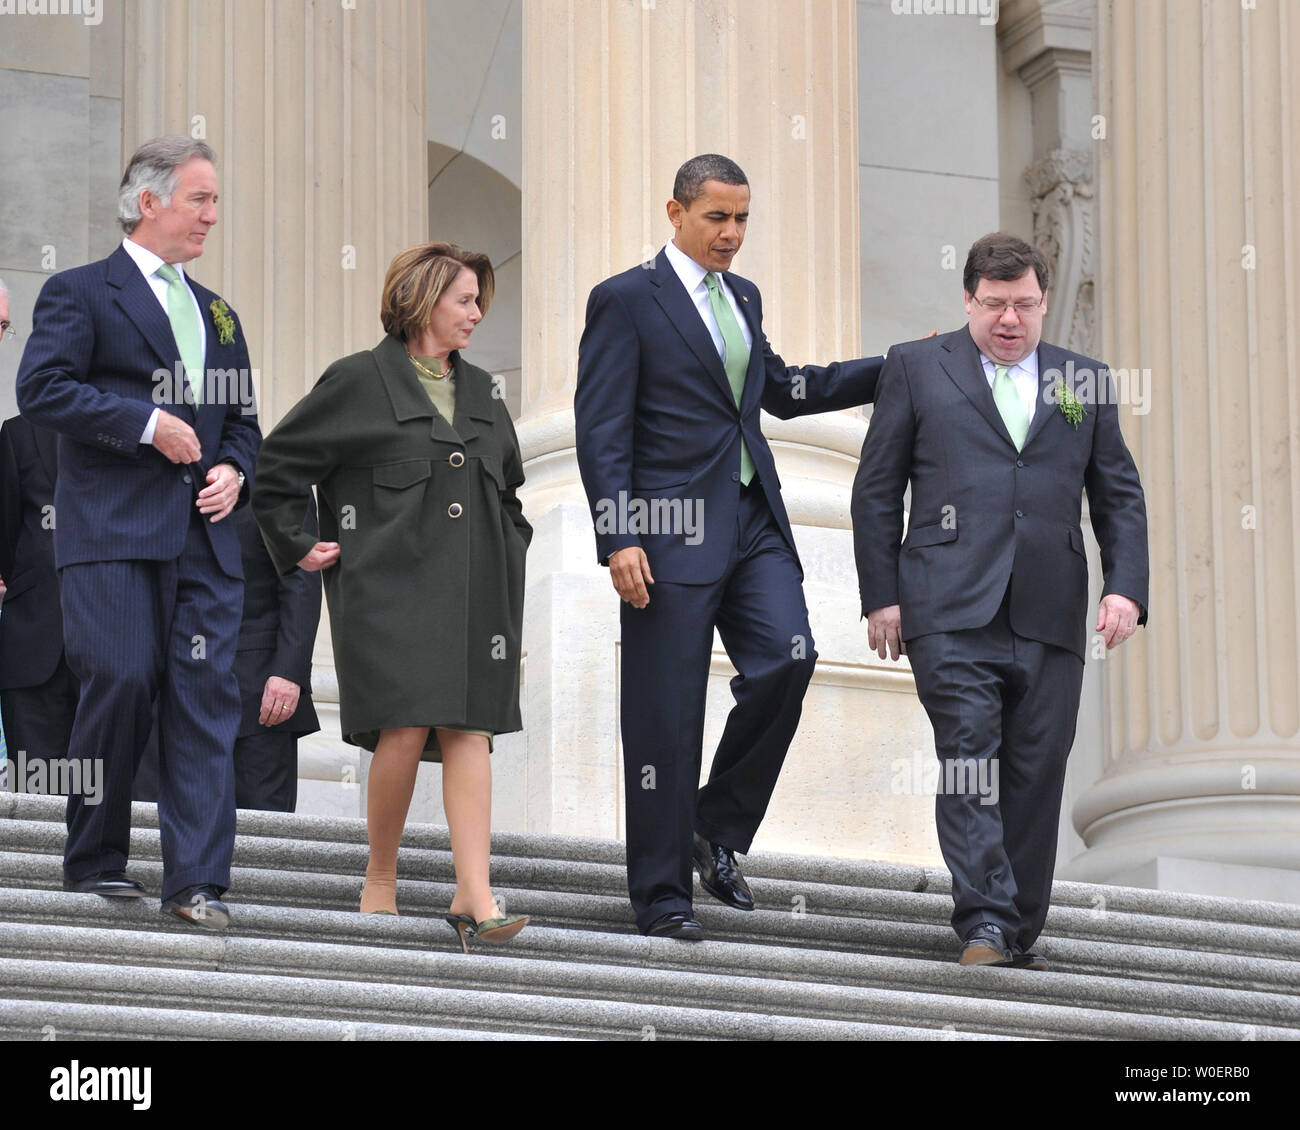 U.S. President Barack Obama (2nd-R) walks with the Irish Taoiseach Brian Cowen (R) Speaker of the House Nancy Pelosi (2nd-L) and Rep. Richard Neal (D-MA) after a St. Patrick's Day Luncheon on Capitol Hill in Washington on March 17, 2009. (UPI Photo/Kevin Dietsch) Stock Photo